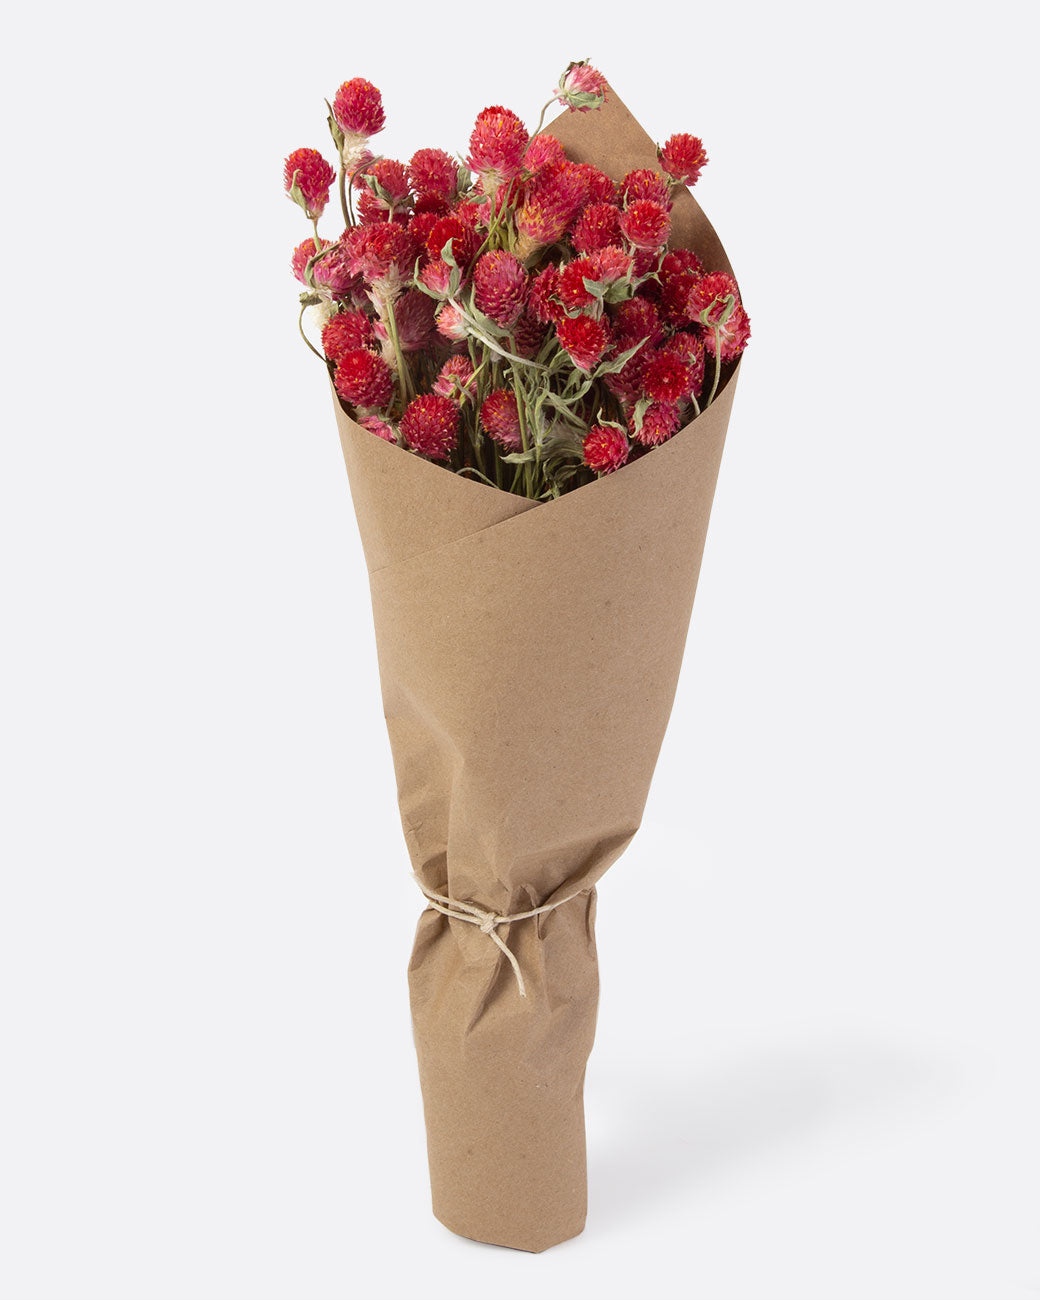 Bundle of dried red globe amaranths wrapped in brown paper.